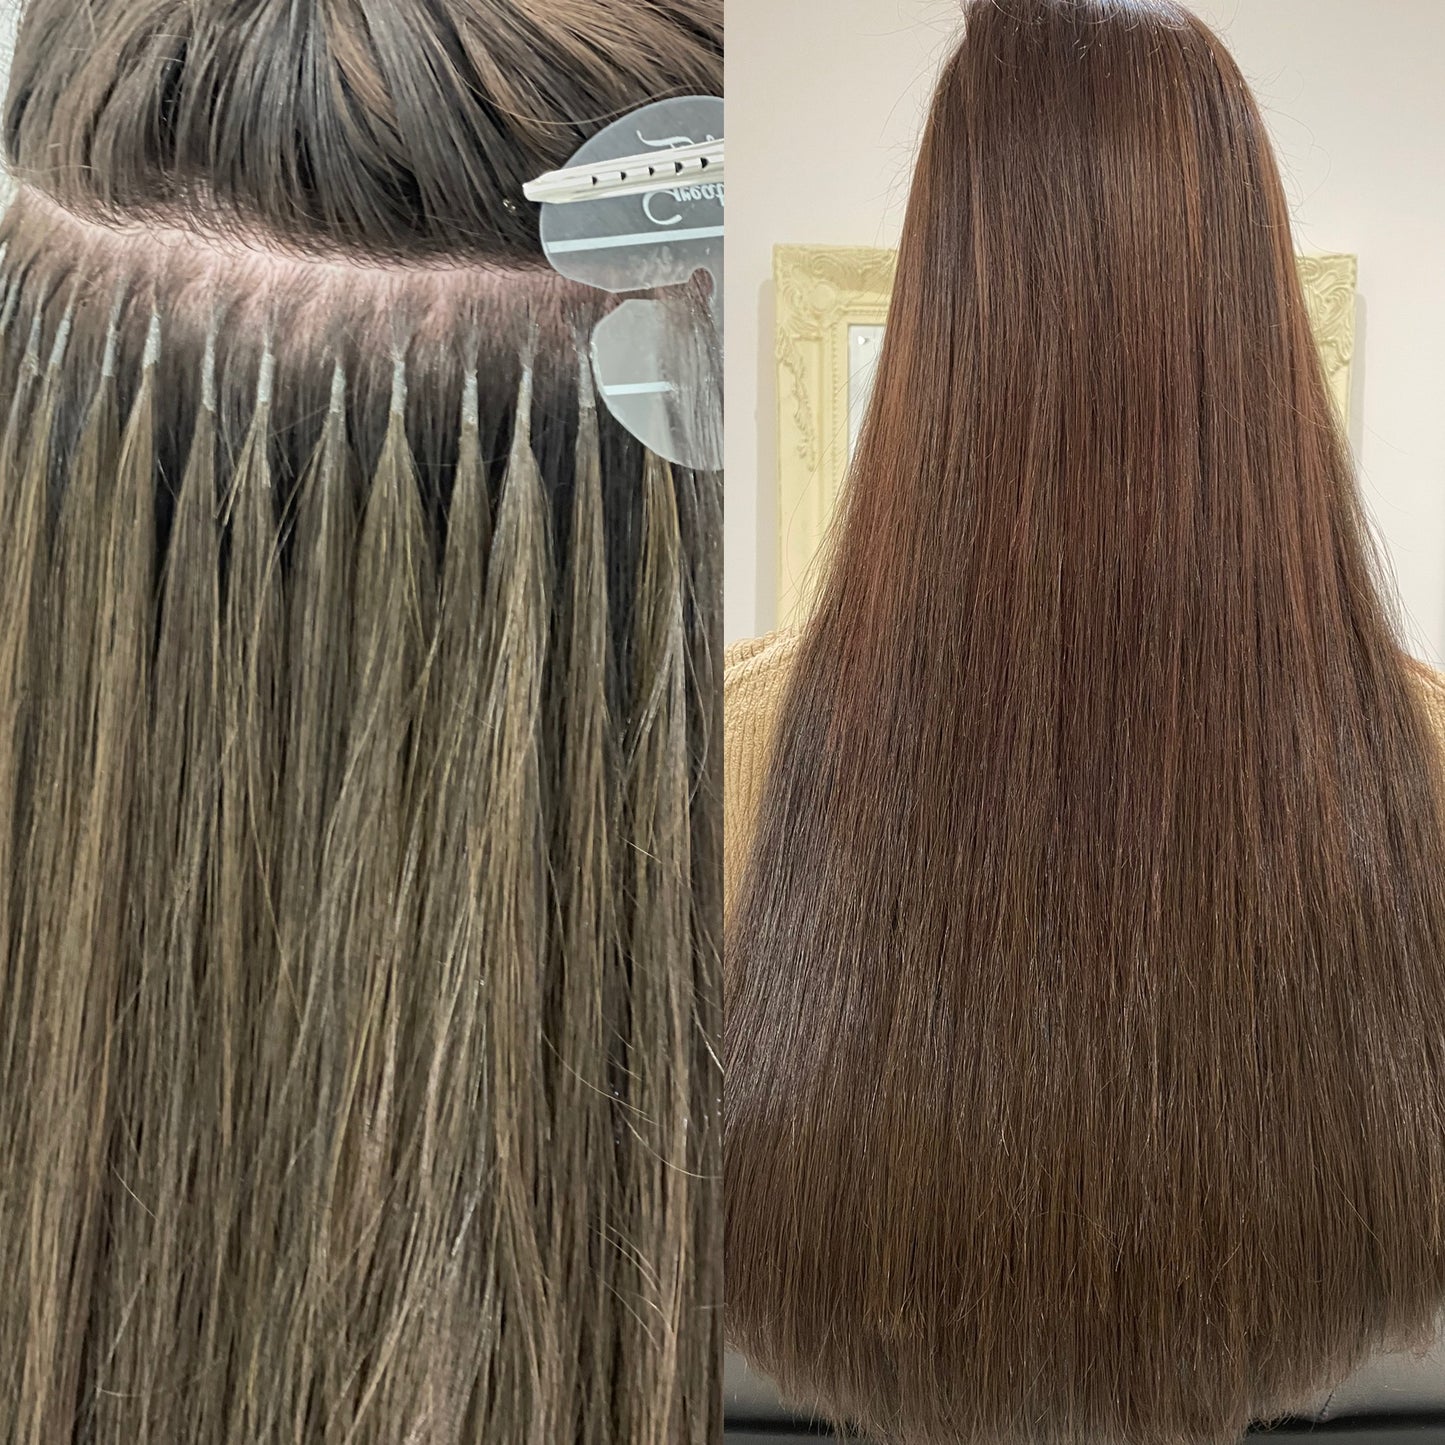 Great Lengths hair exetnsion